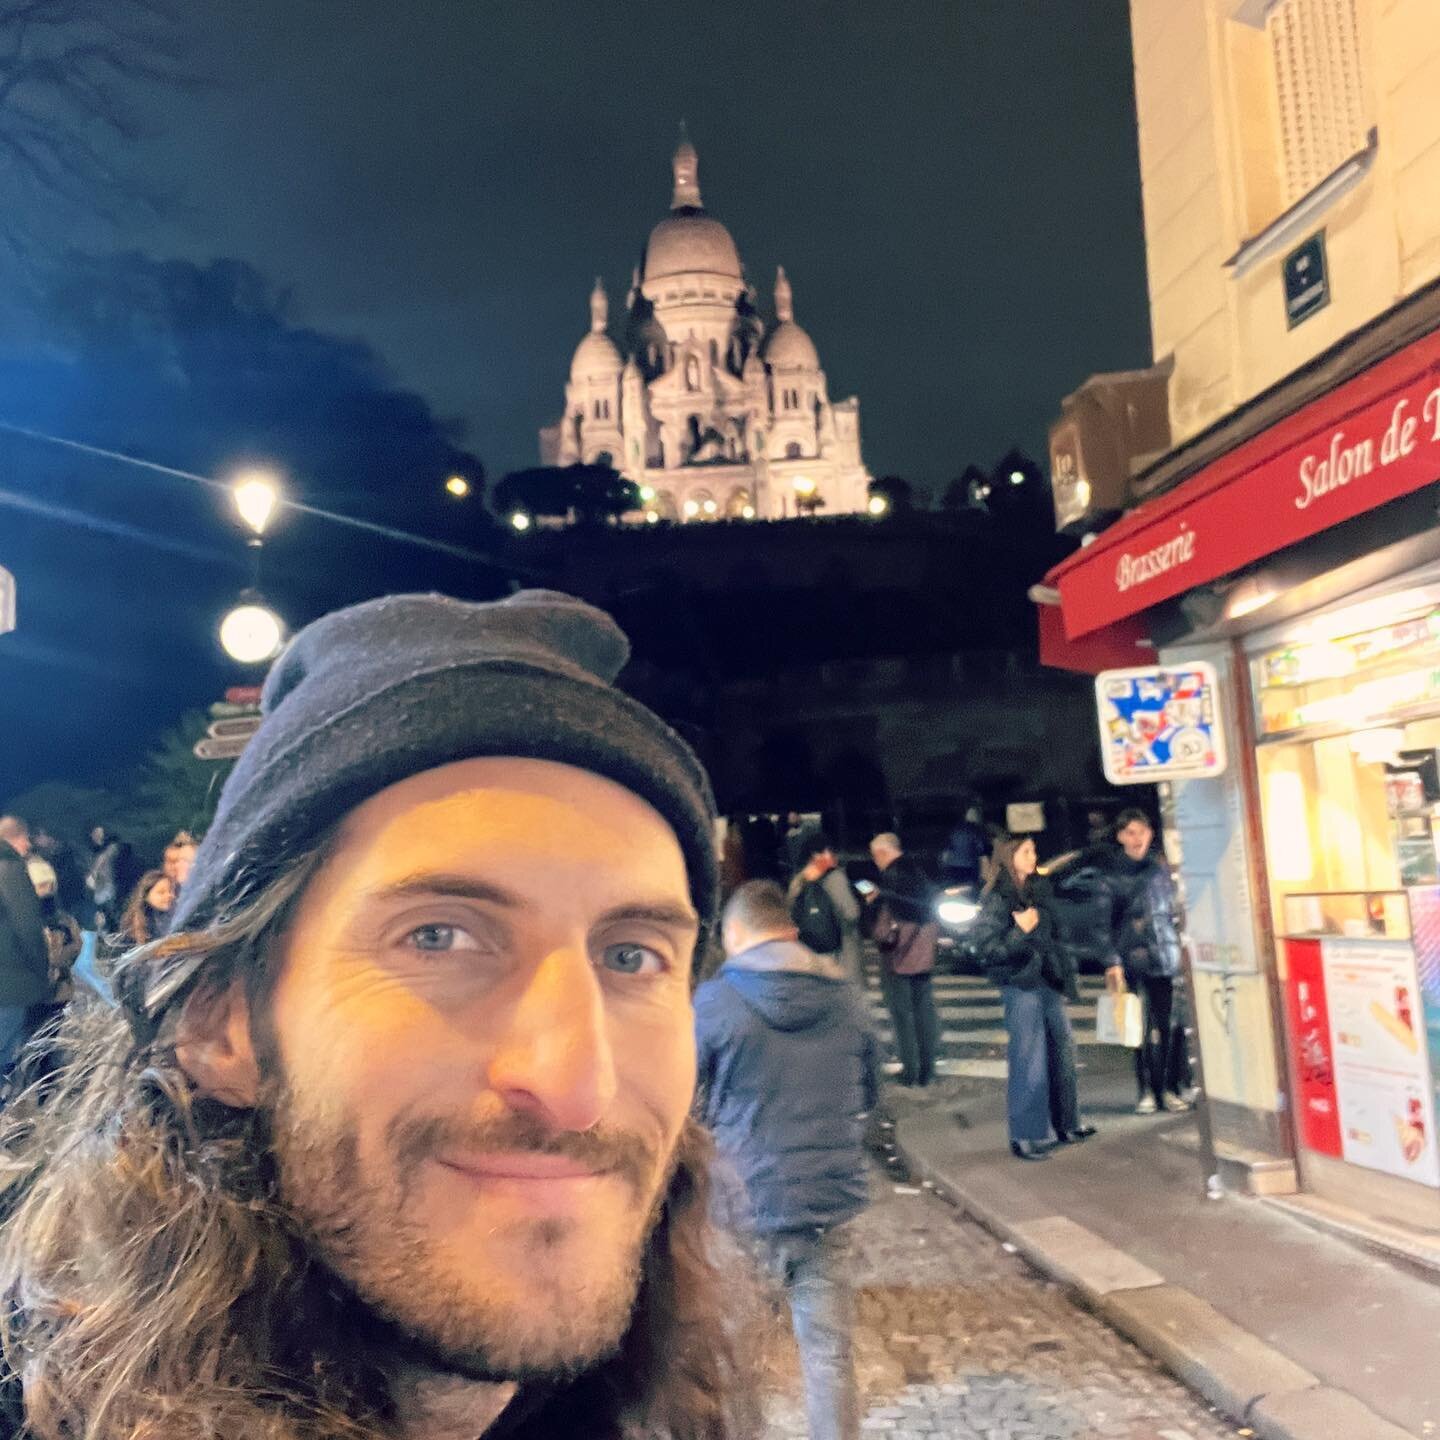 Paris Pics

Excited to be have a real live gig in Paris this Thursday at my favorite neighborhood bar Bar Basque in Montmartre. The stars aligned for me to be joined by @harryterrell_ and @michael_harlen on drums and bass ❤️ going to be a lot of fun!